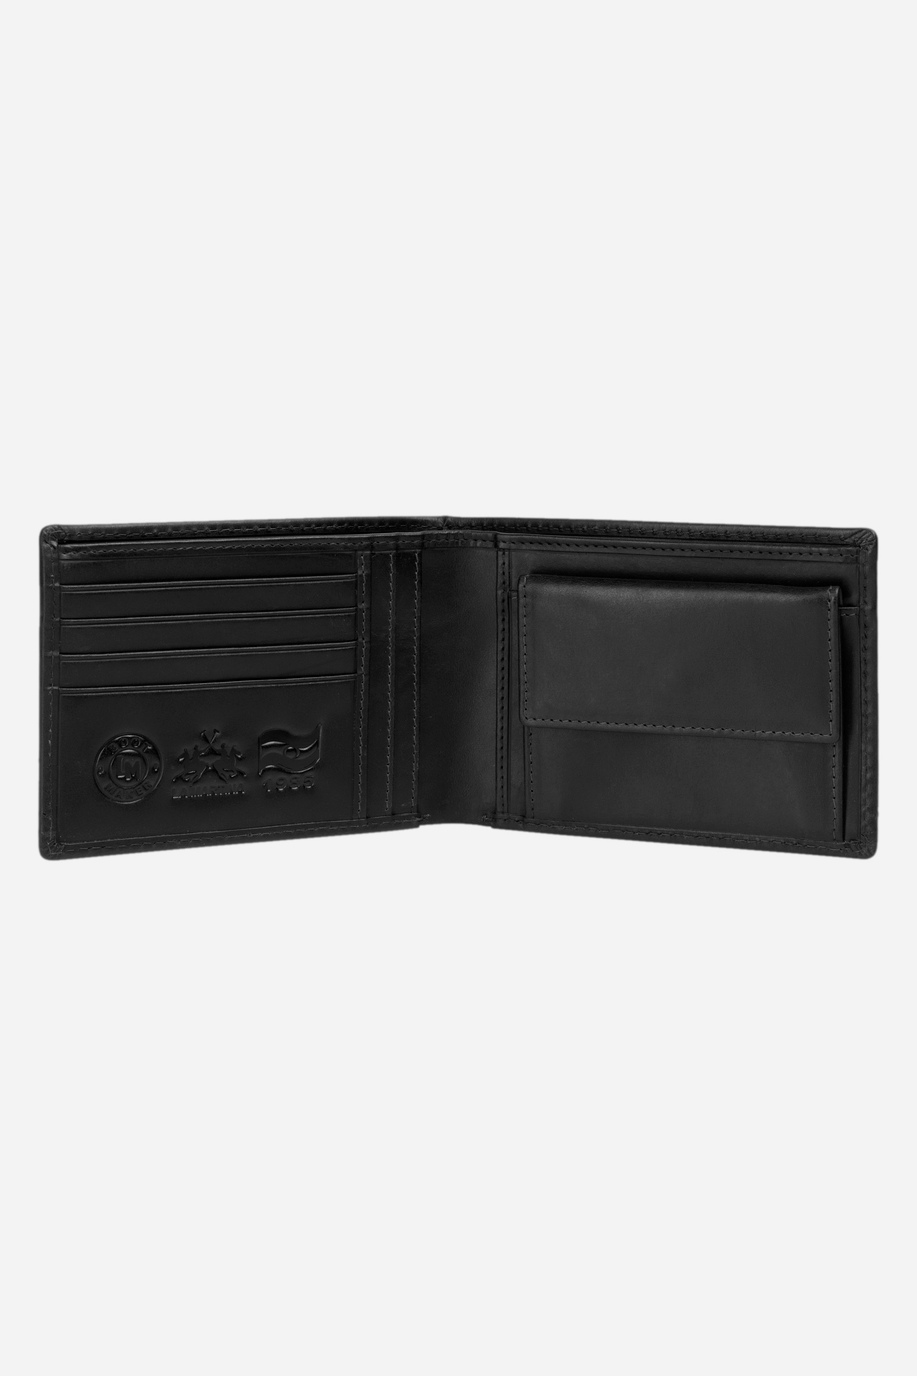 Men's leather wallet with coin purse - Axel - Wallets and key chains | La Martina - Official Online Shop